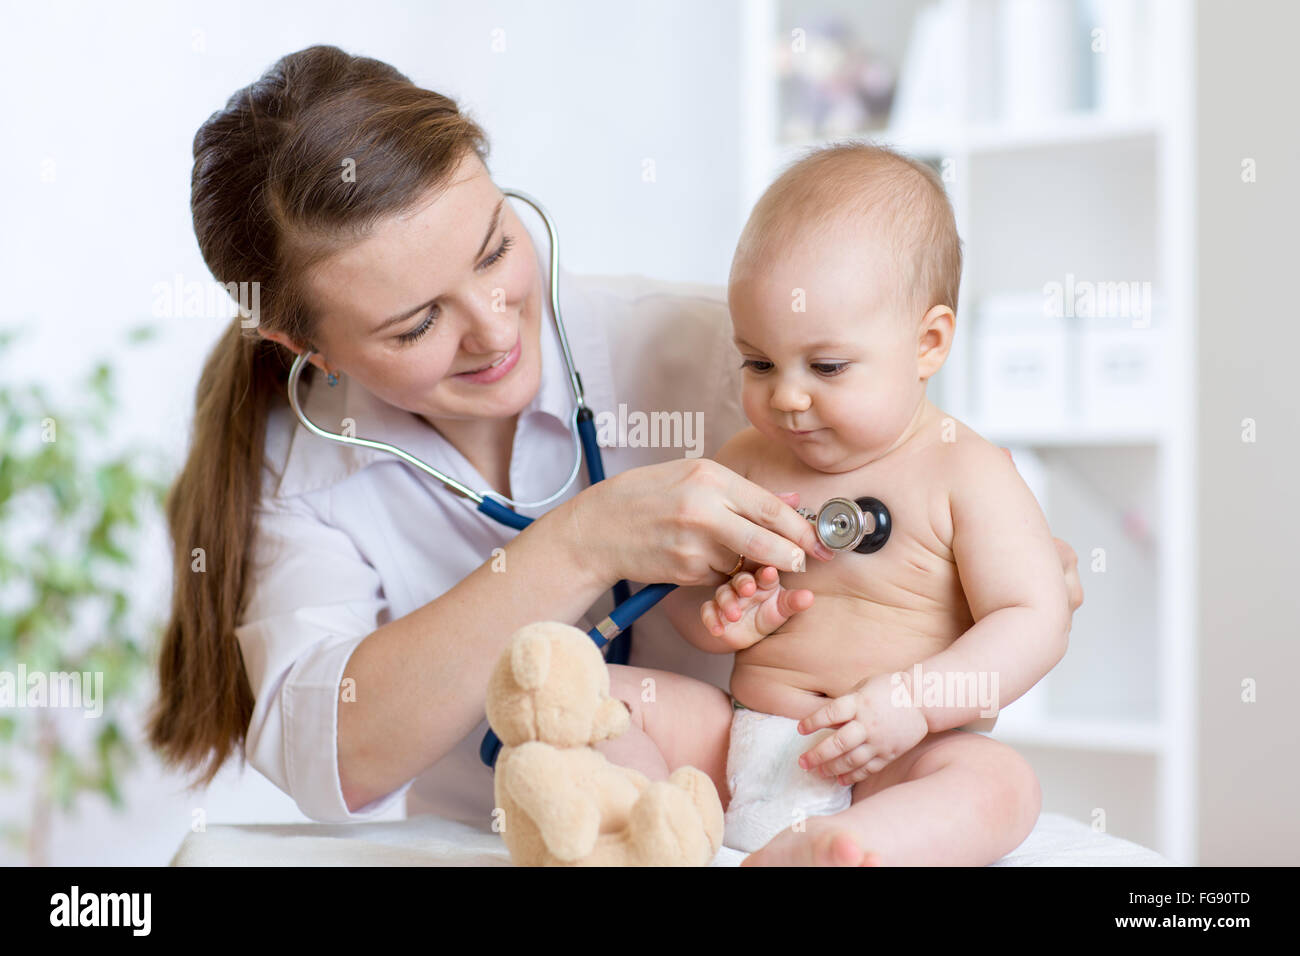 Cute woman pediatrician examining of baby kid with stethoscope Stock Photo